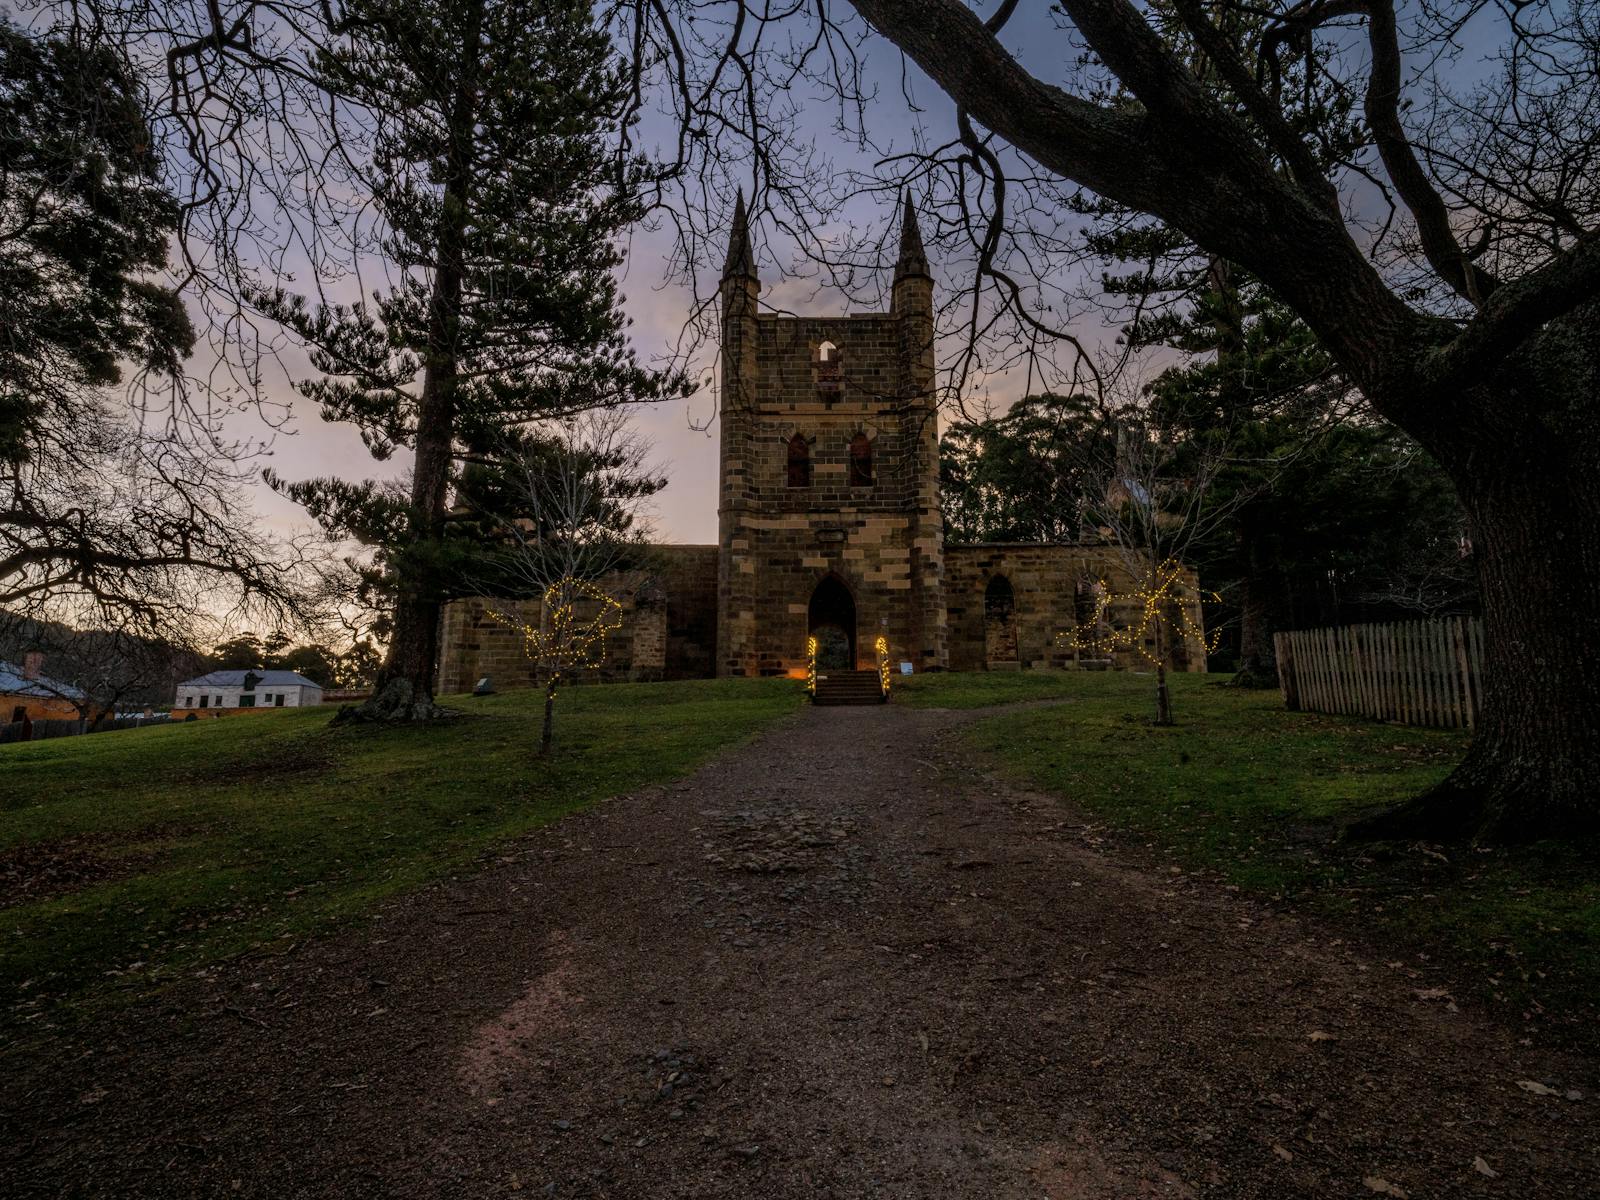 The old Convict Church lit up by some decorative lights, and surrounded by tree branches at dusk